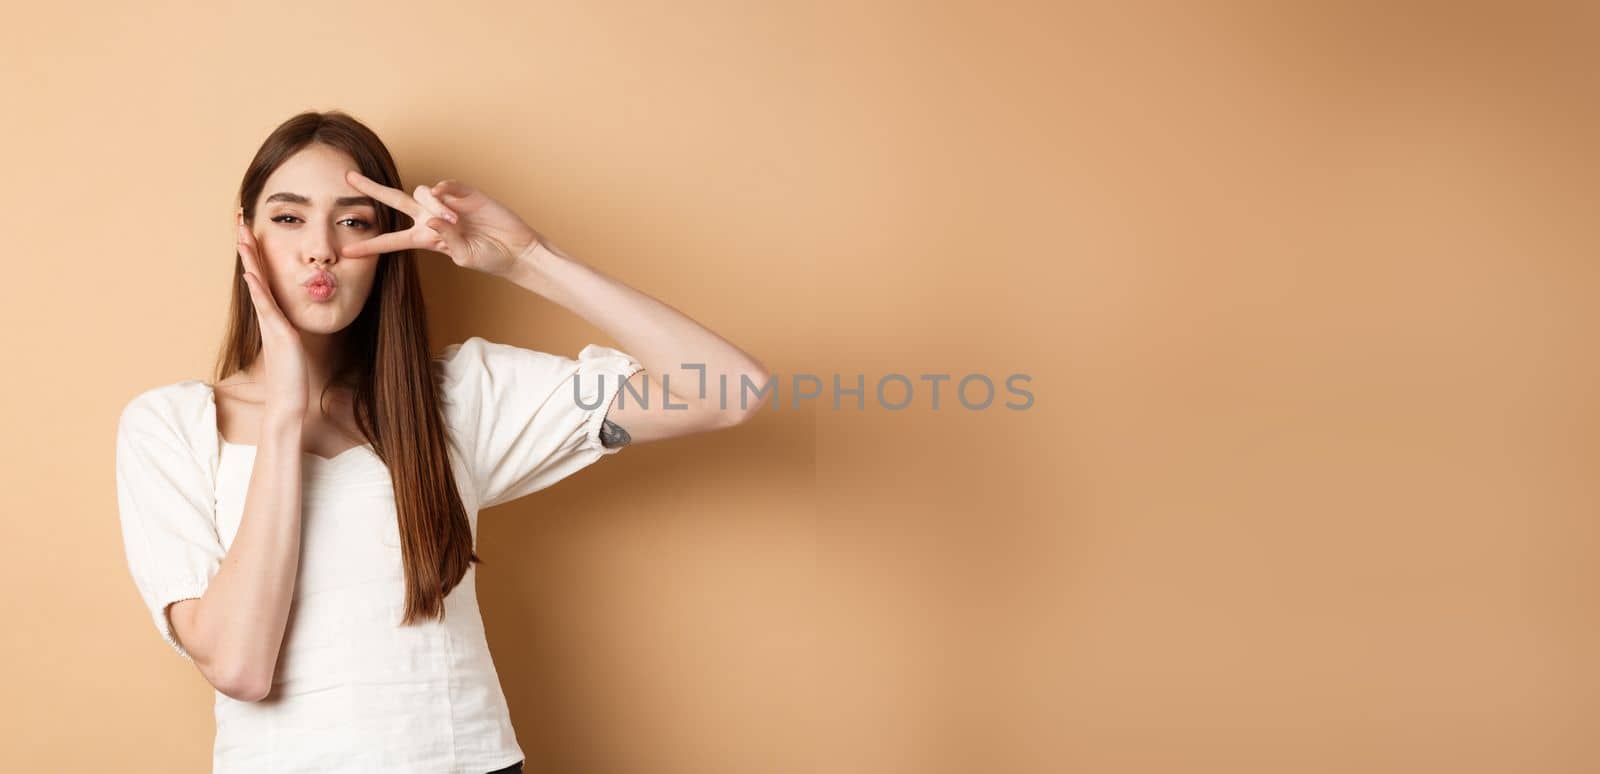 Cute woman showing v-sign and pucker lips for kiss, touching face with silly expression, standing on beige background.